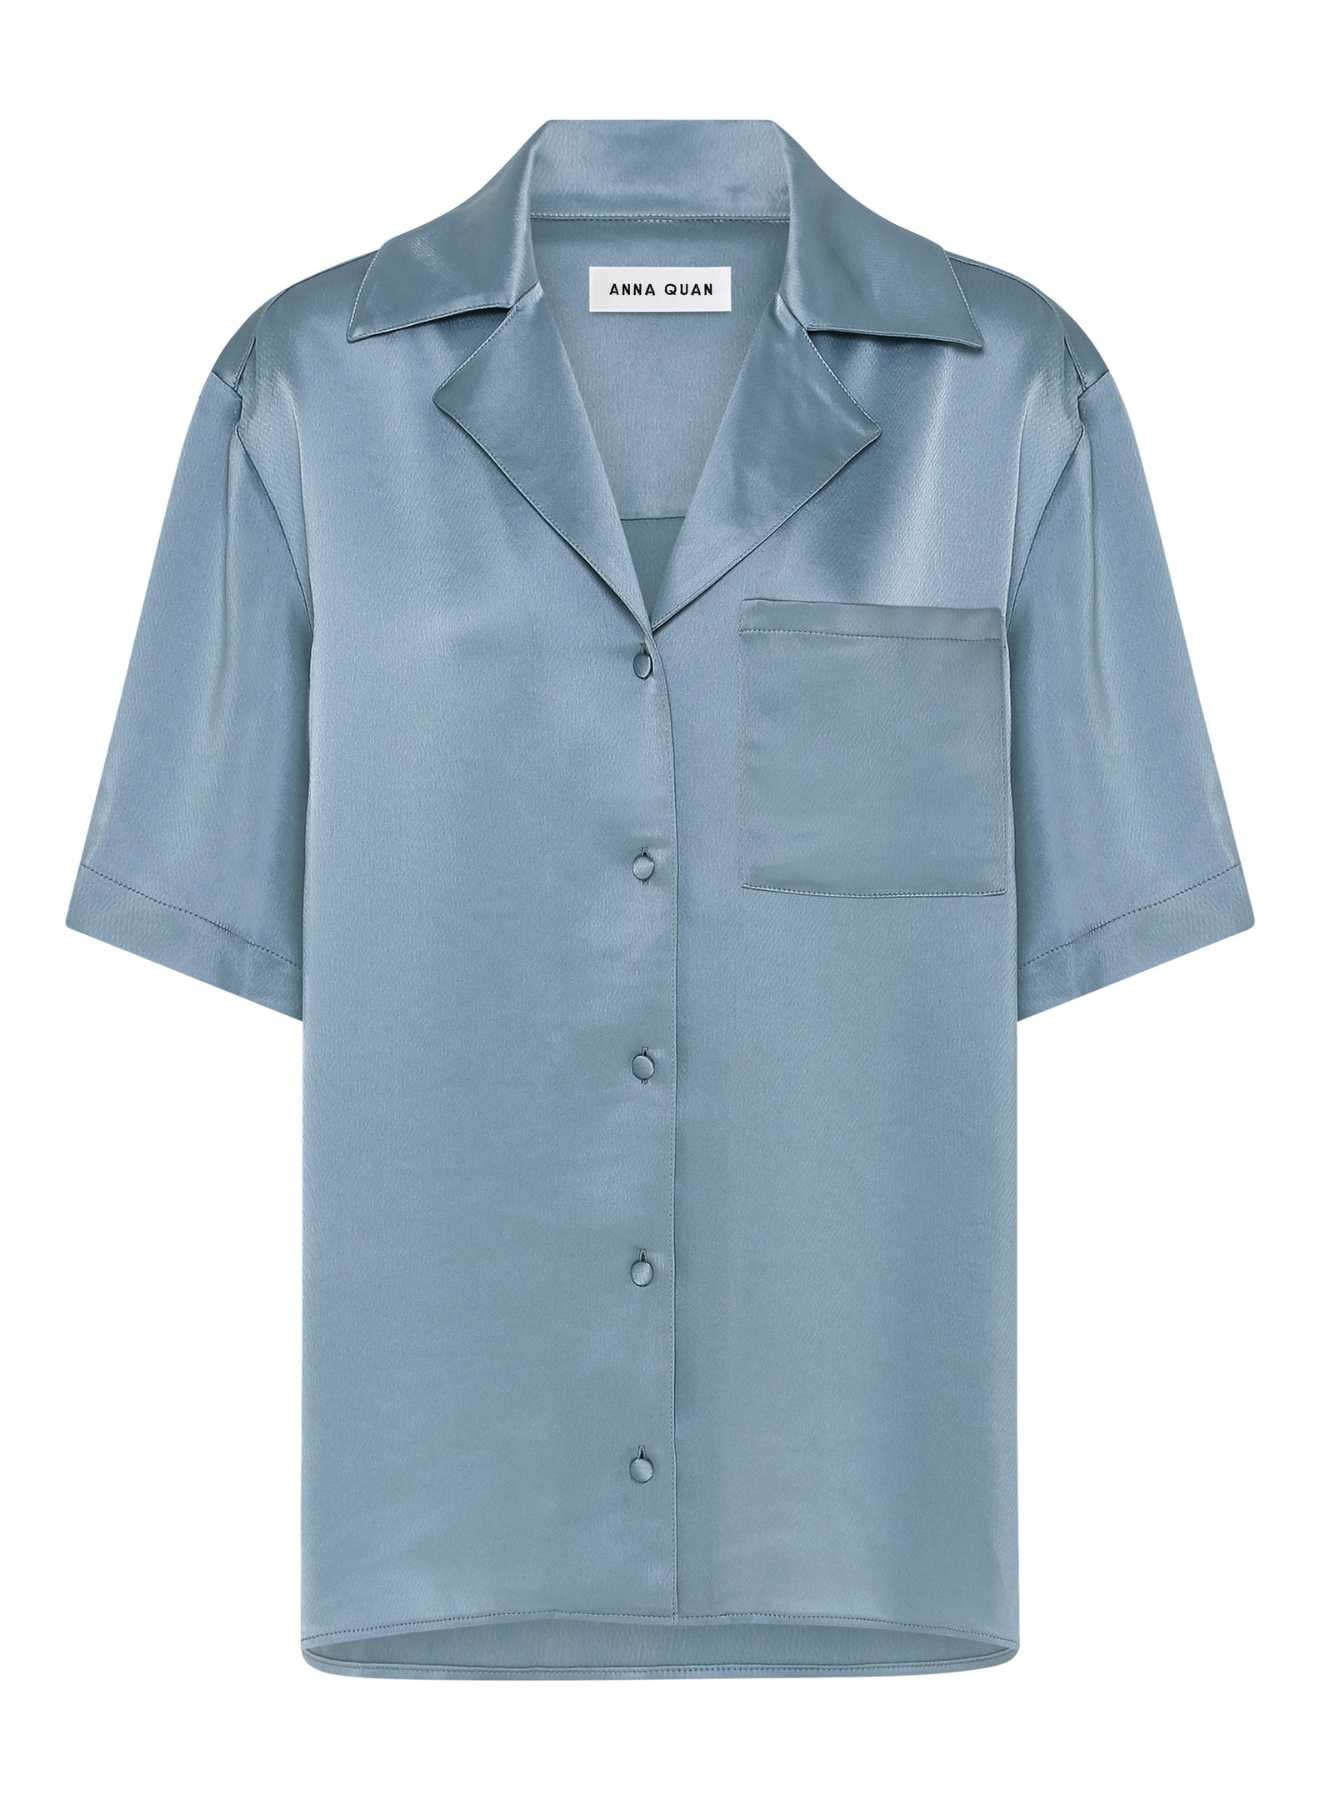 Satin Oversized Camper Collar Short Sleeve Shirt – an relaxed oversized satin shirt, designed with a boxy shoulder, camper collar, breast pocket, and back yoke. Wear with the wide leg matching Mateo Pant. An elevated everyday look worn with sandals or go from day-to-night and pair with heels for a dinner matching set, dinner shirt, party set or event set.